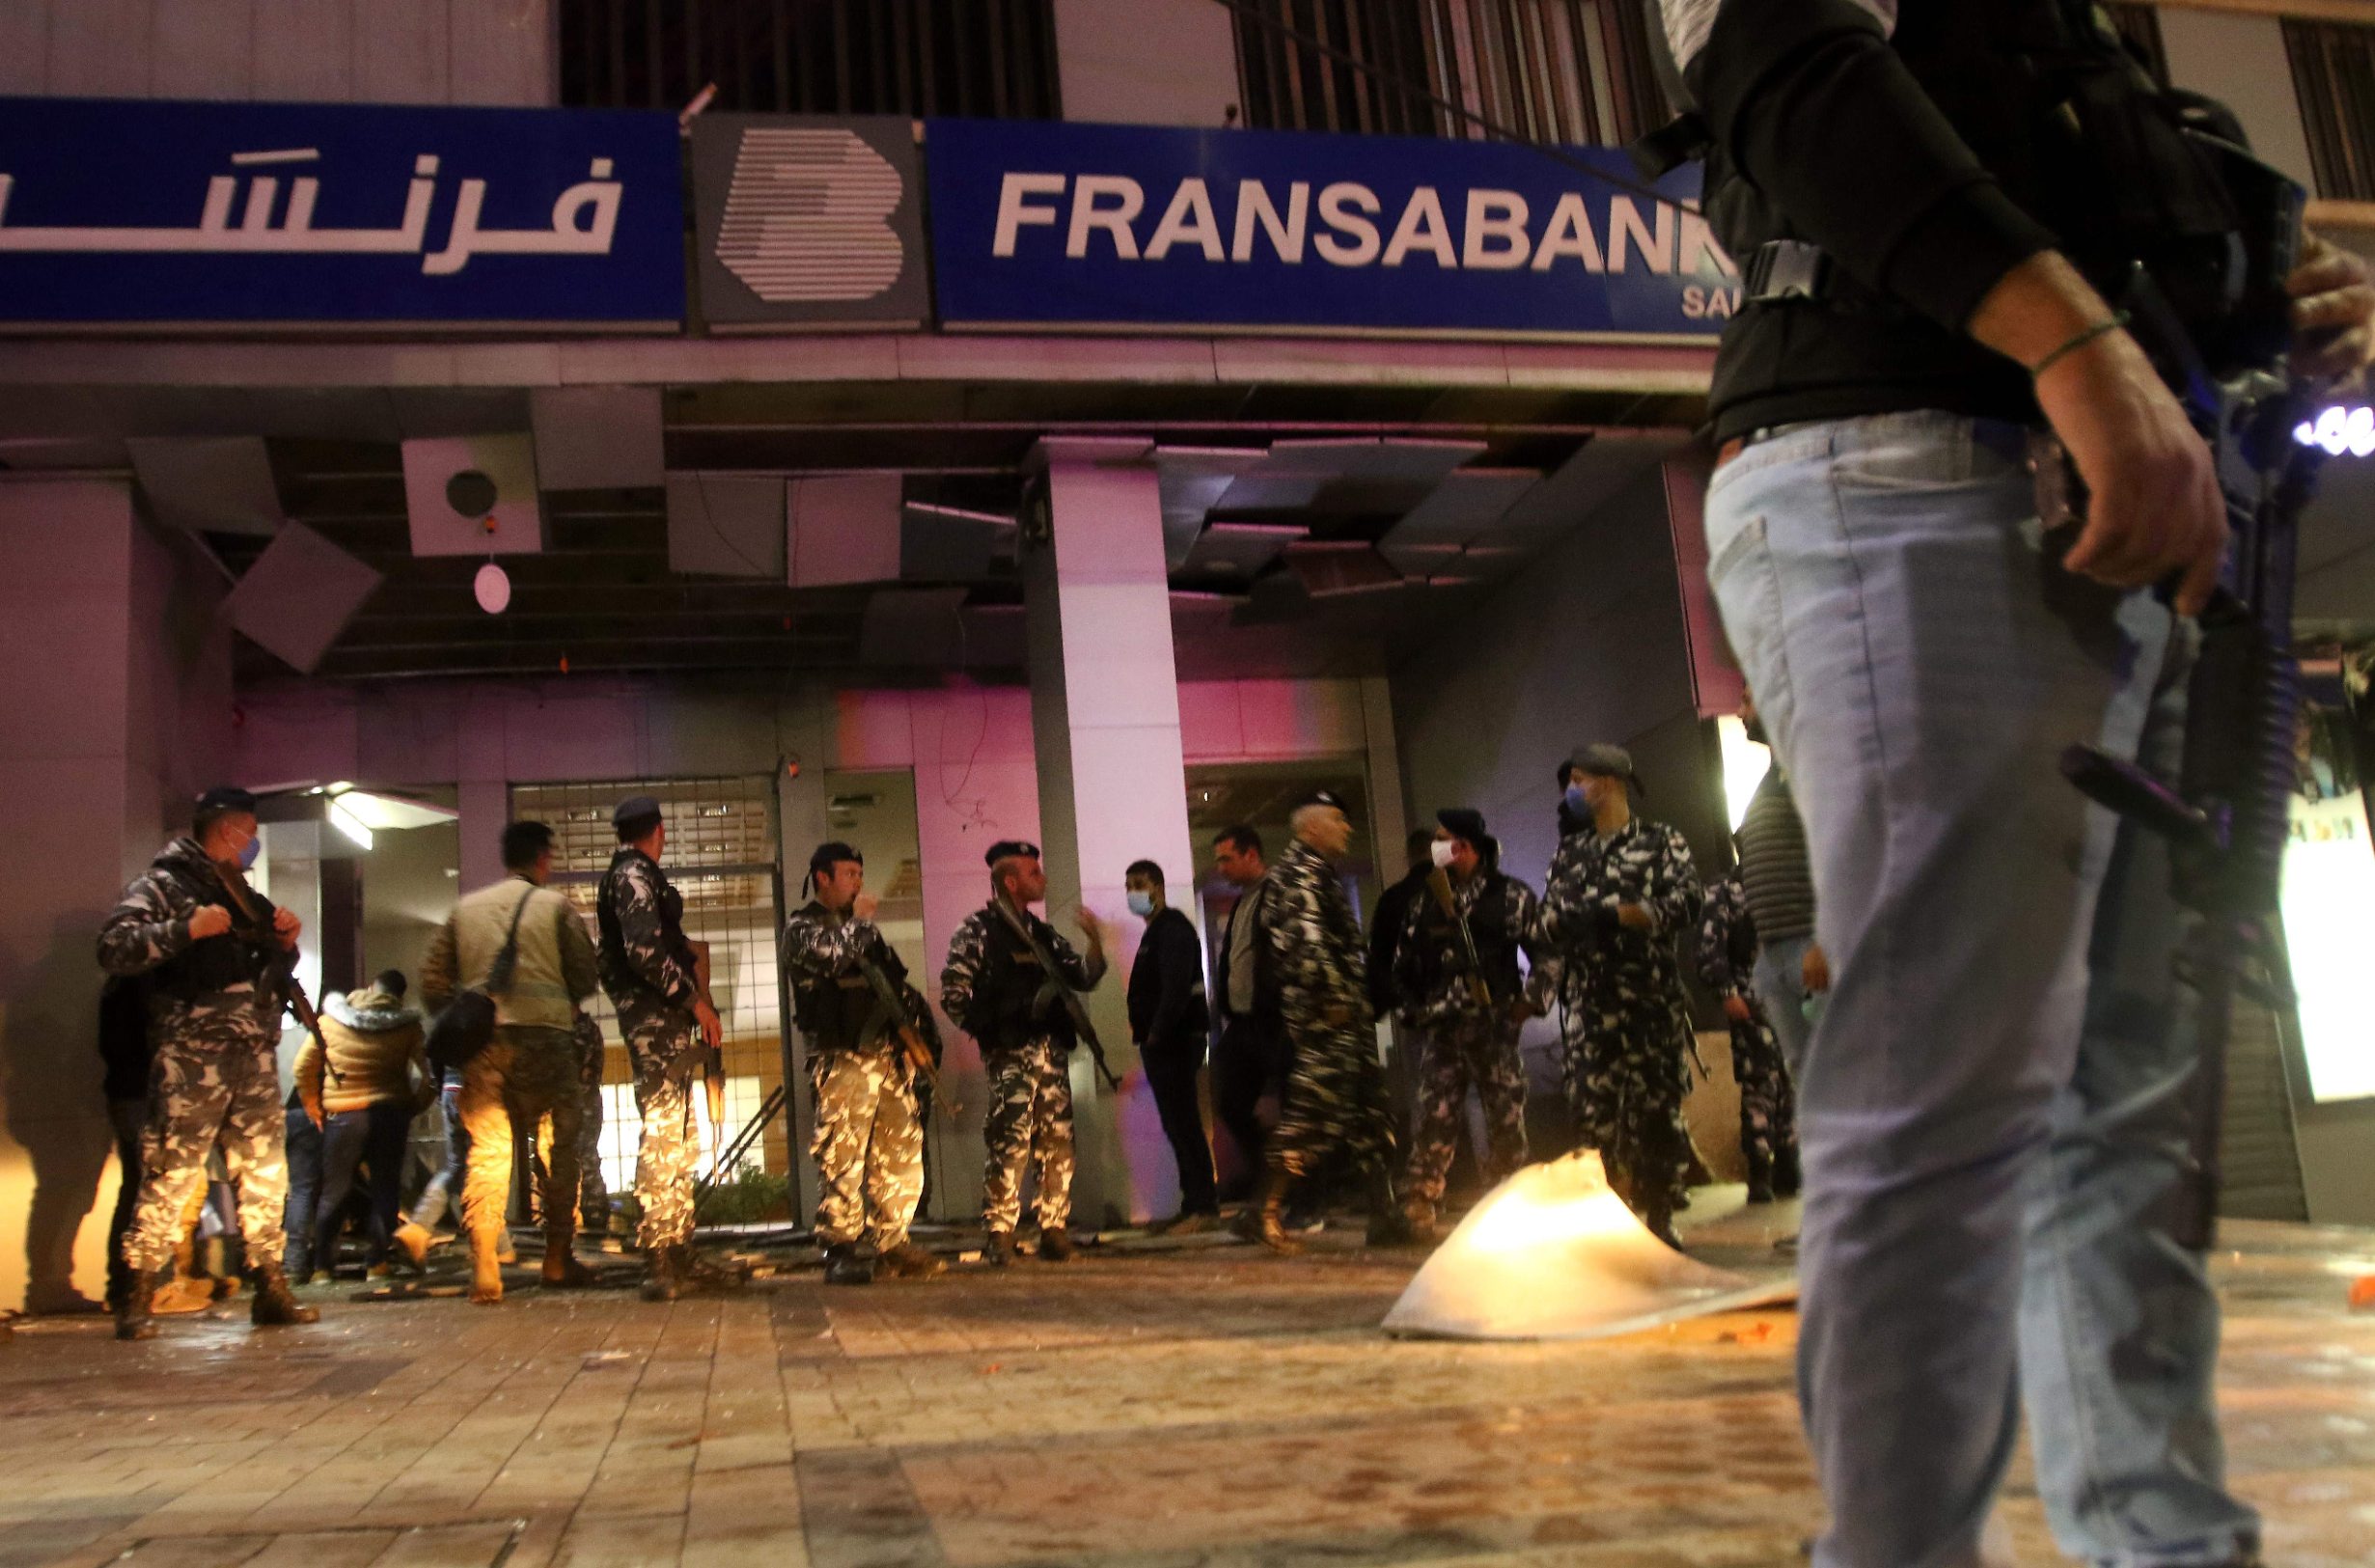 Lebanese security forces inspect the entrance of a Fransabank branch in Lebanon's southern city of Sidon on April 25, 2020, after unknown assailants targeted the bank entrance with an explosive device. - Lebanon is grappling with a severe lack of liquidity and its worst economic crisis in decades, compounded since mid-March by a lockdown to stem the novel coronavirus. Banks have gradually restricted dollar withdrawals until halting them altogether last month, and transfers abroad have been banned. In recent months, the Lebanese pound has plummeted in value from around 1,500 pounds against the US dollar to almost 3,800 on the parallel market. (Photo by Mahmoud ZAYYAT / AFP)